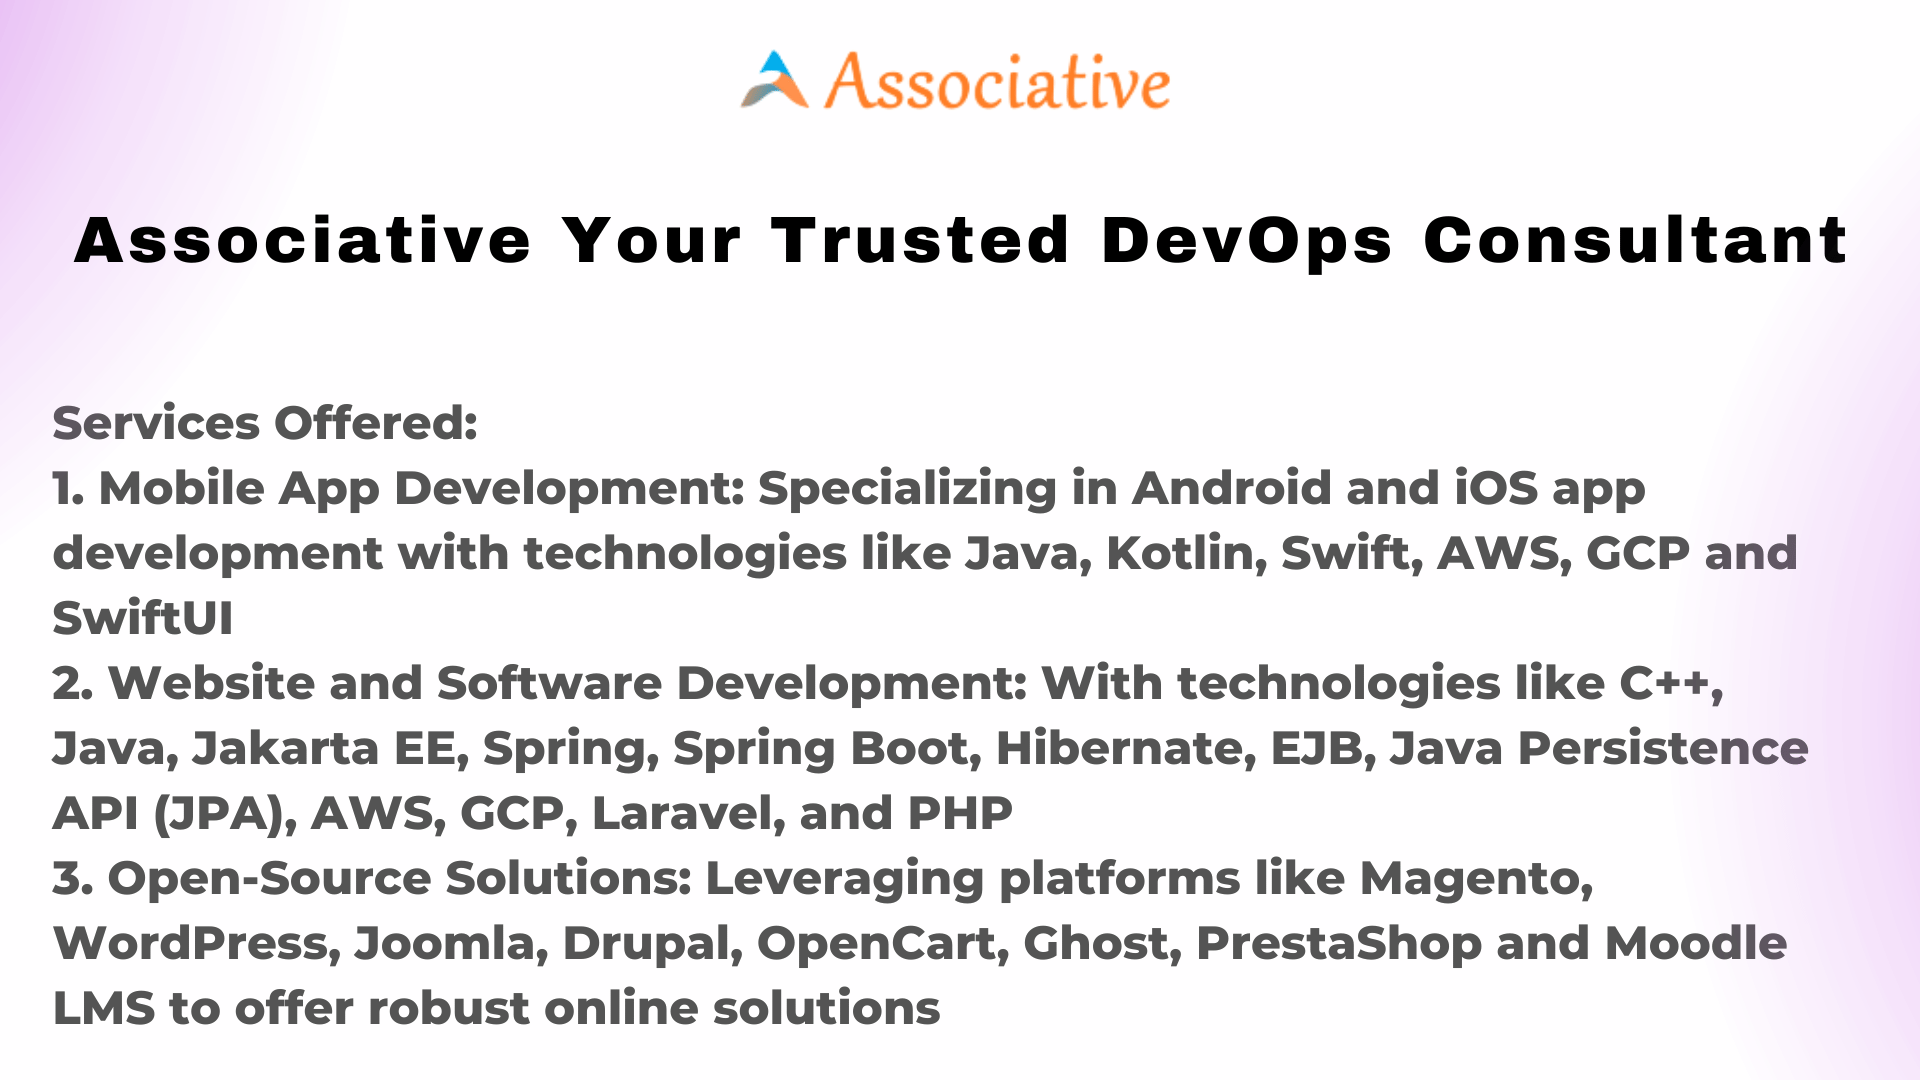 Associative Your Trusted DevOps Consultant